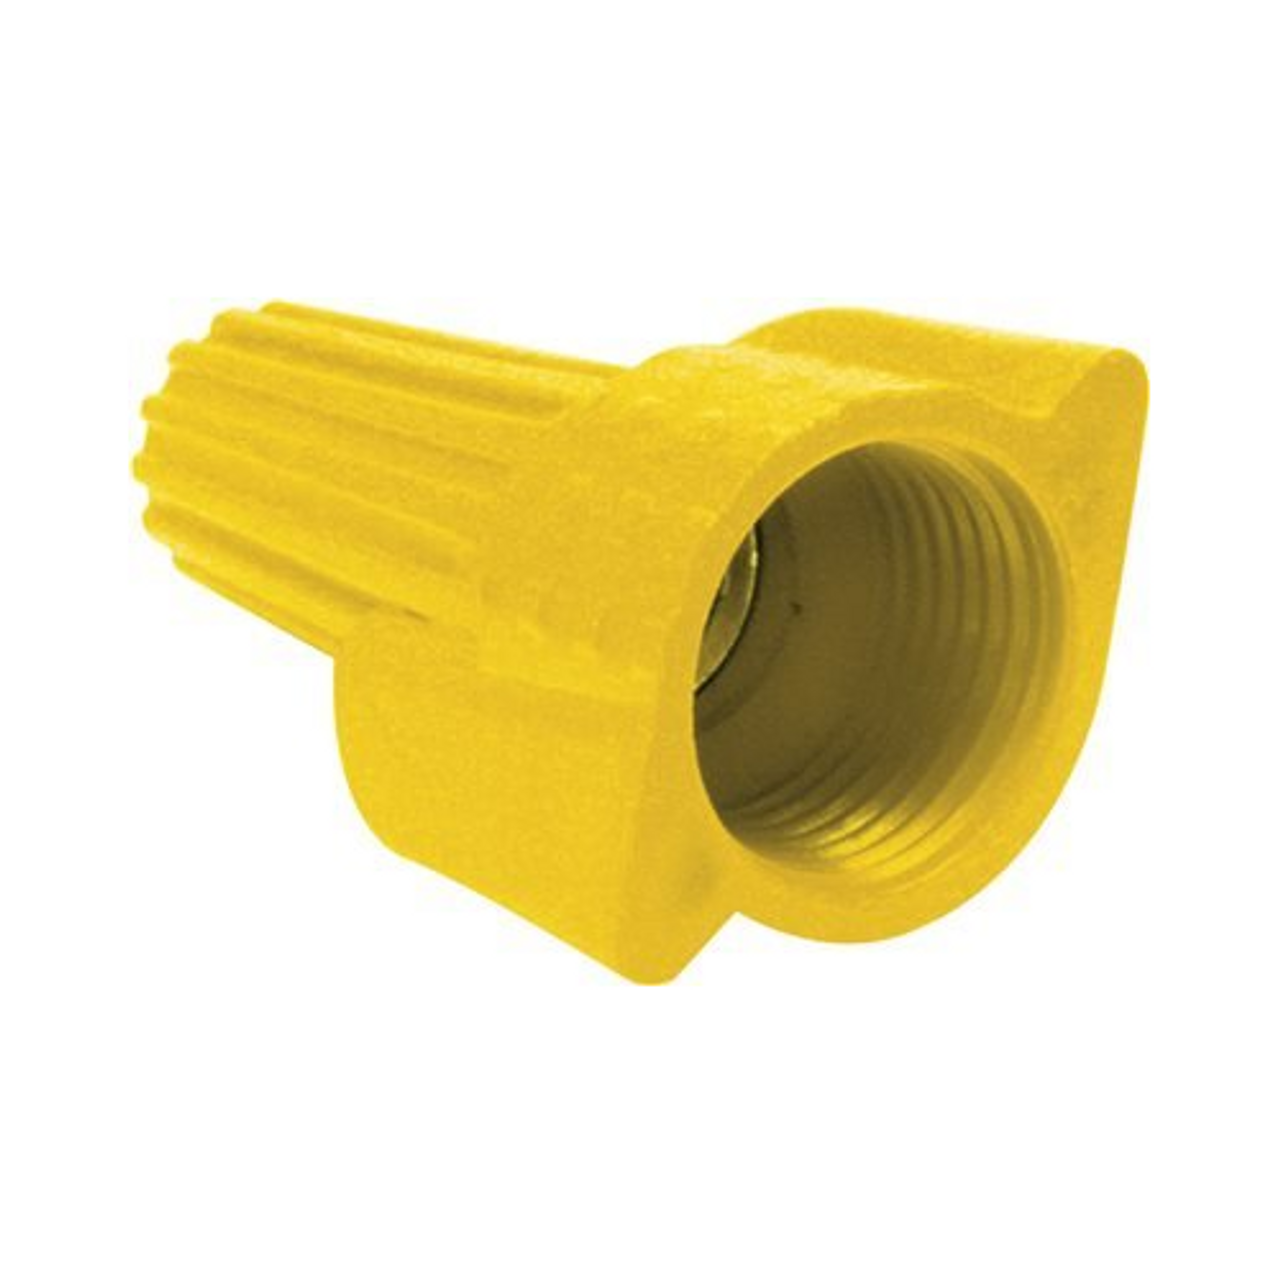 PREFERRED INDUSTRIES 602852 Wing-Type Wire Connector, Yellow, 100 Per Box